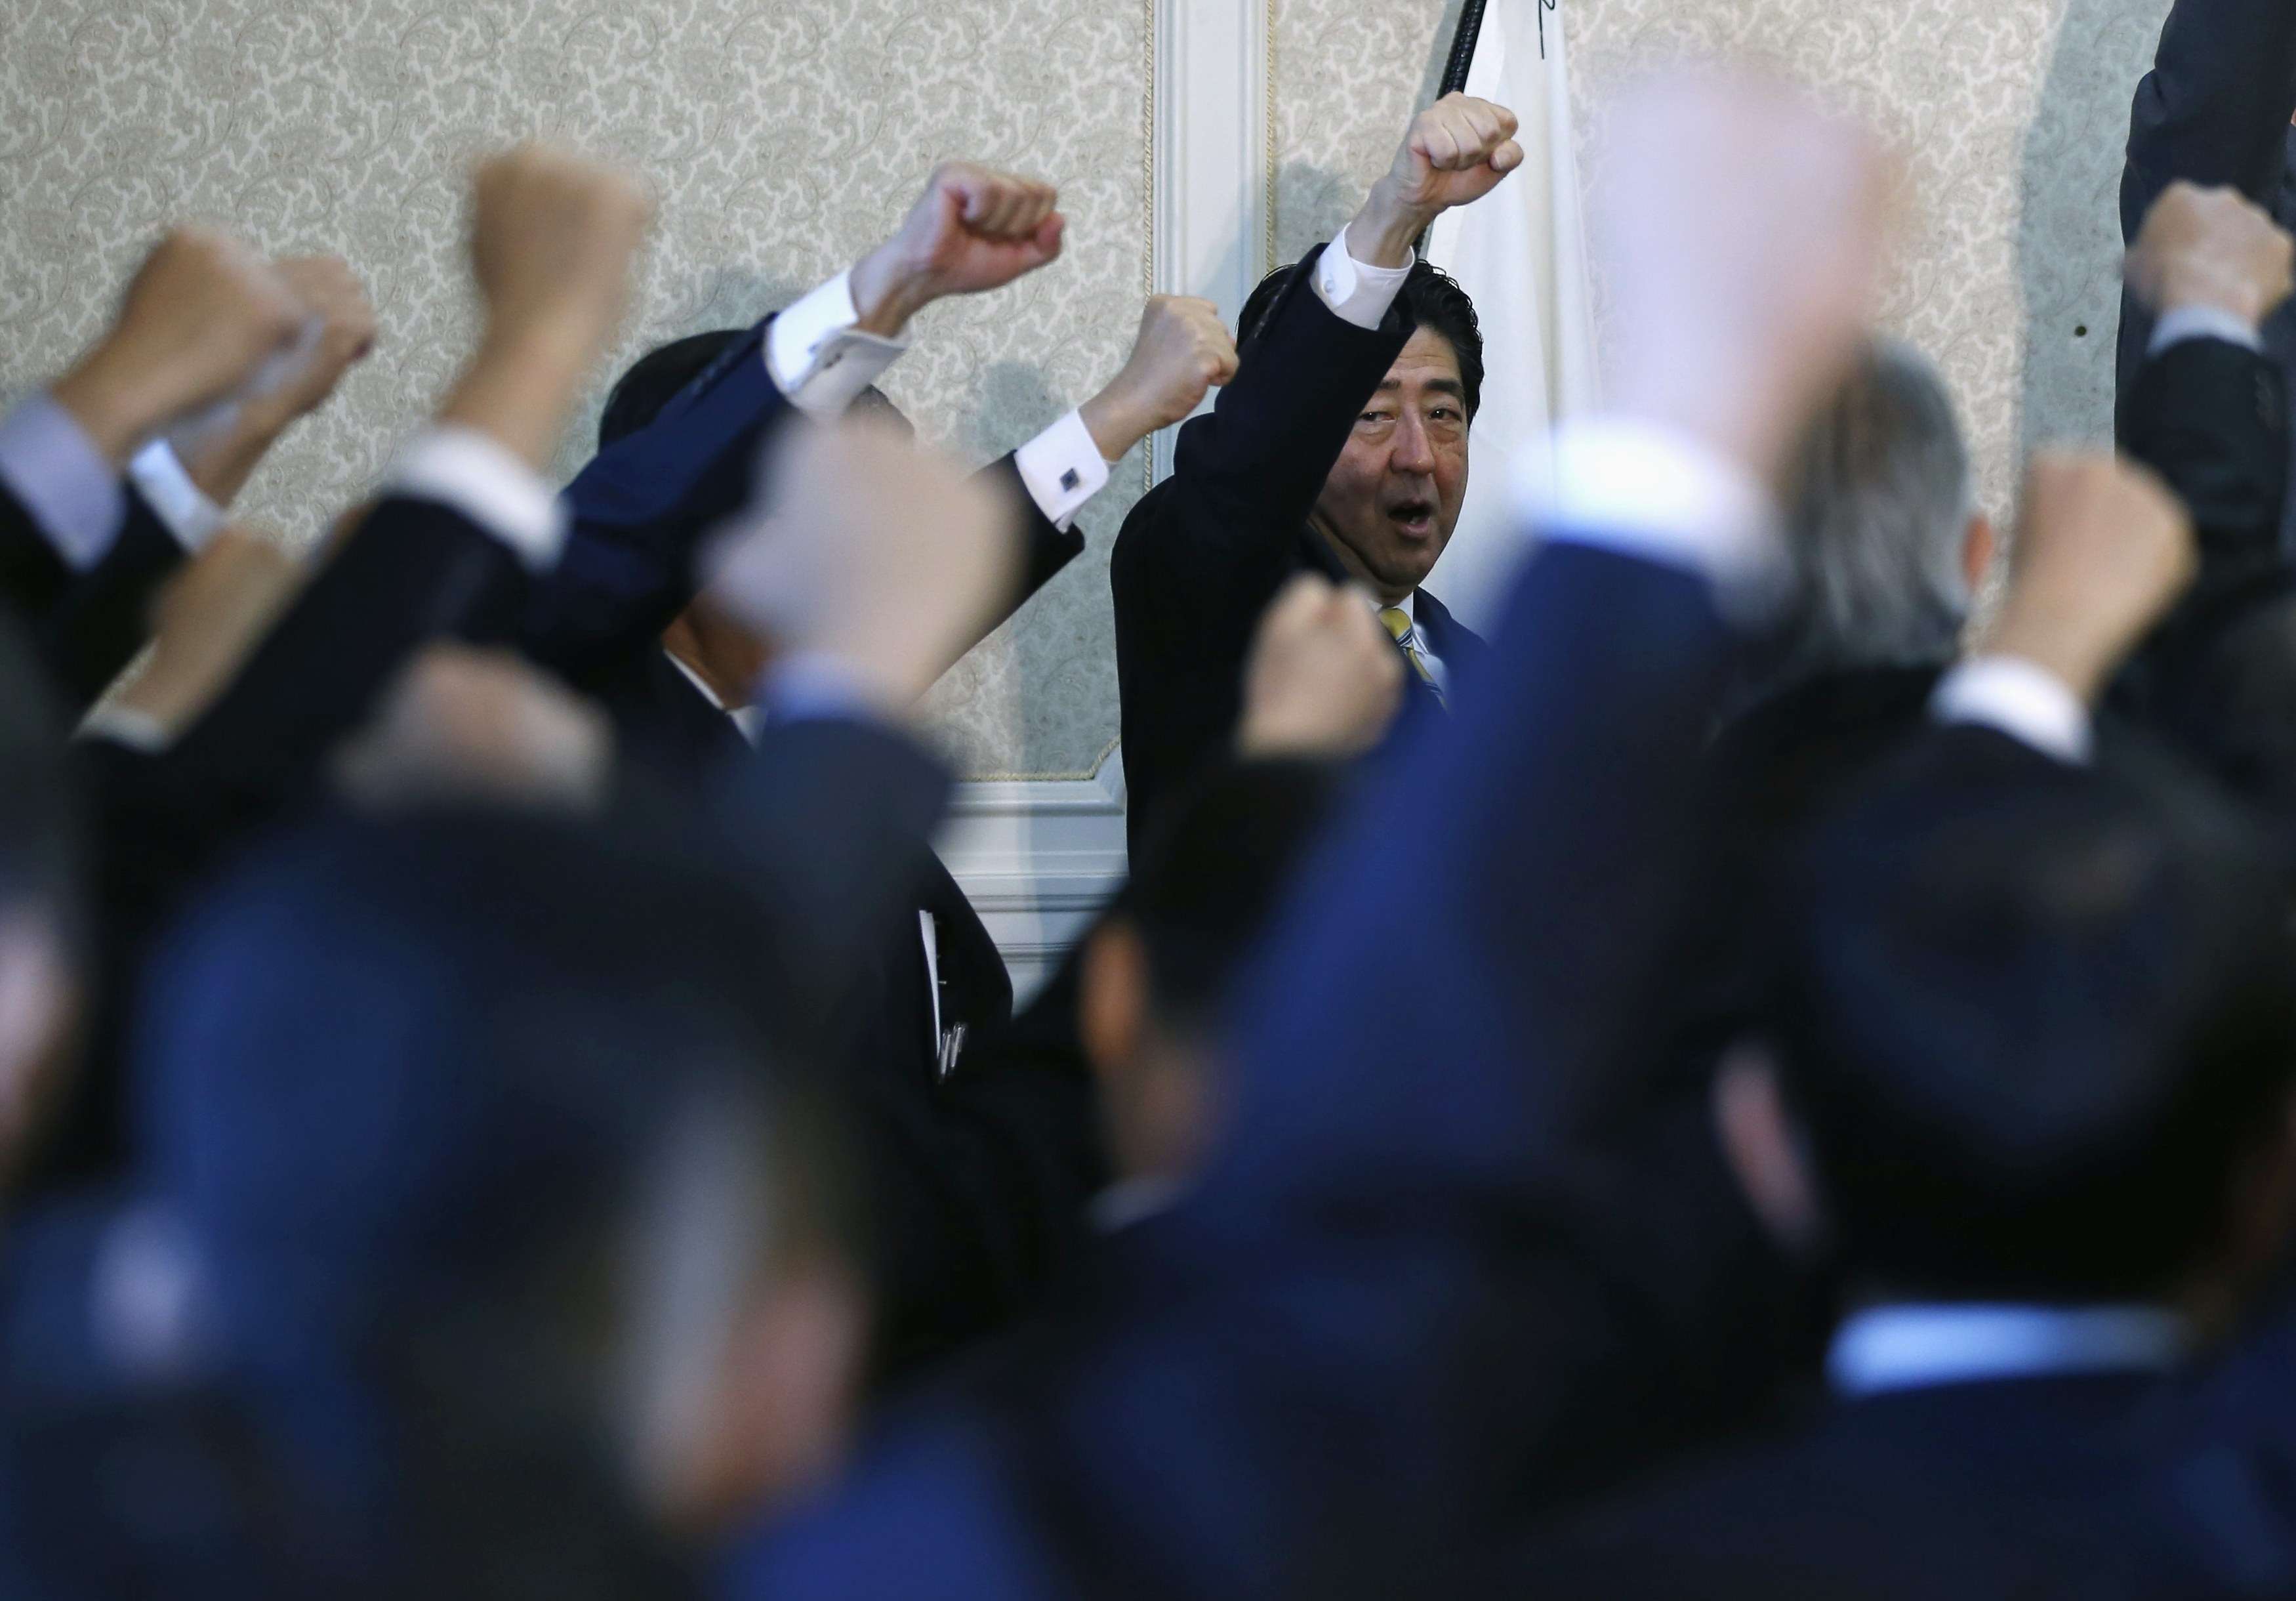 The Japanese Prime Minister’s ‘Abenomics’ are motivated, says Cathy Holcombe, by “a prideful determination to maintain the country’s status as dominant economic power”. Photo: Reuters